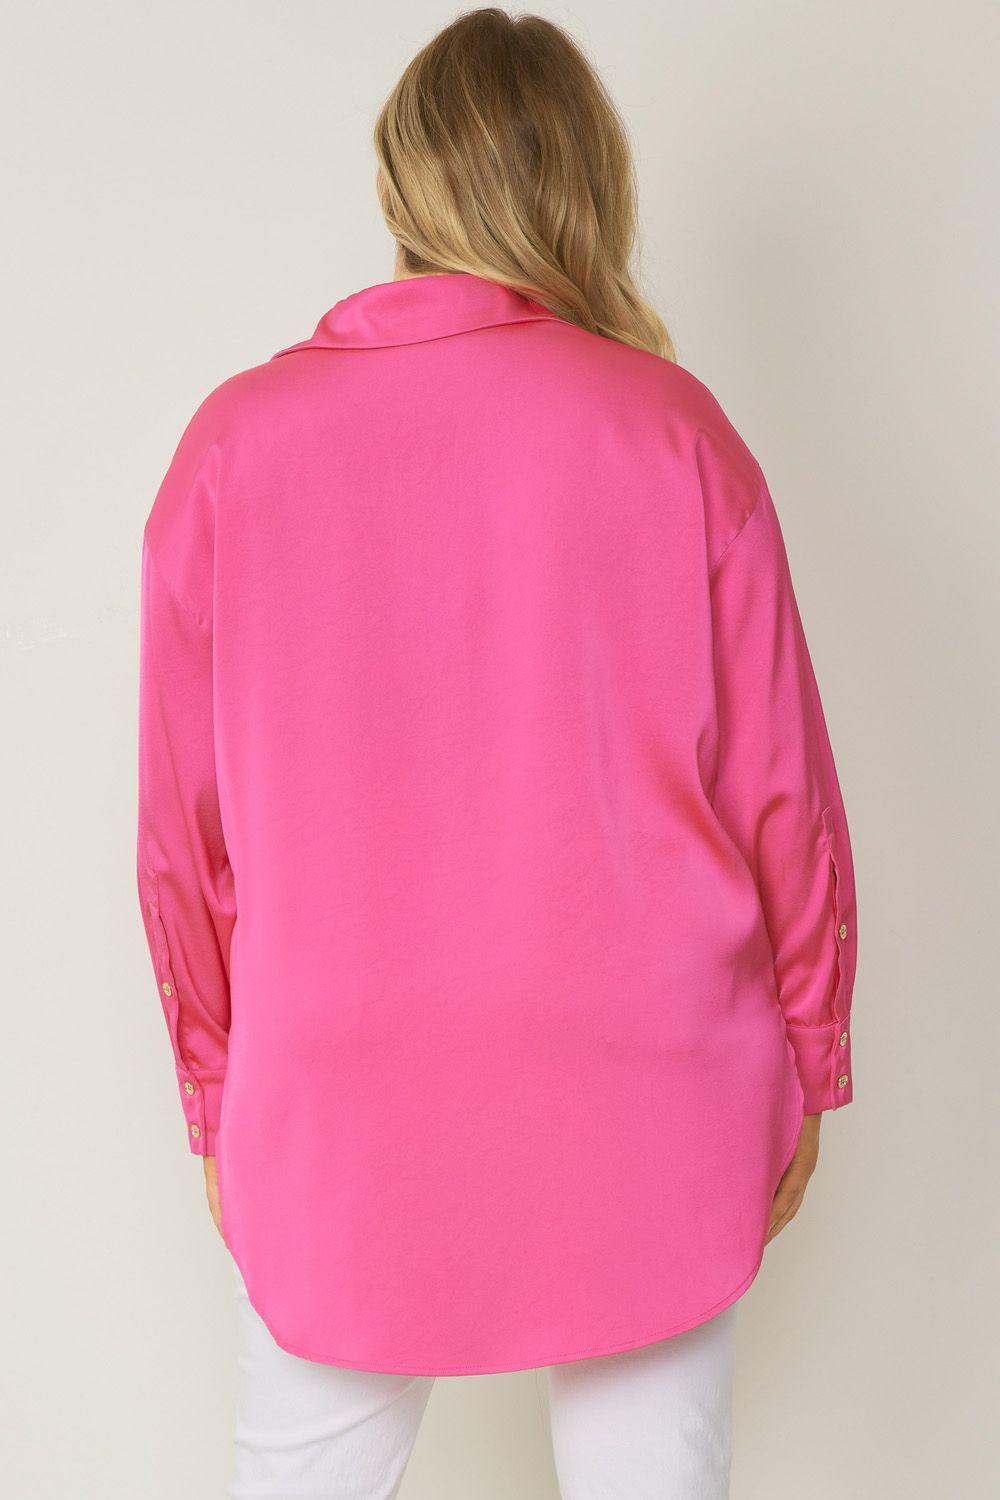 Long-sleeved collared button down satin  blouse Plus boutique hot pink